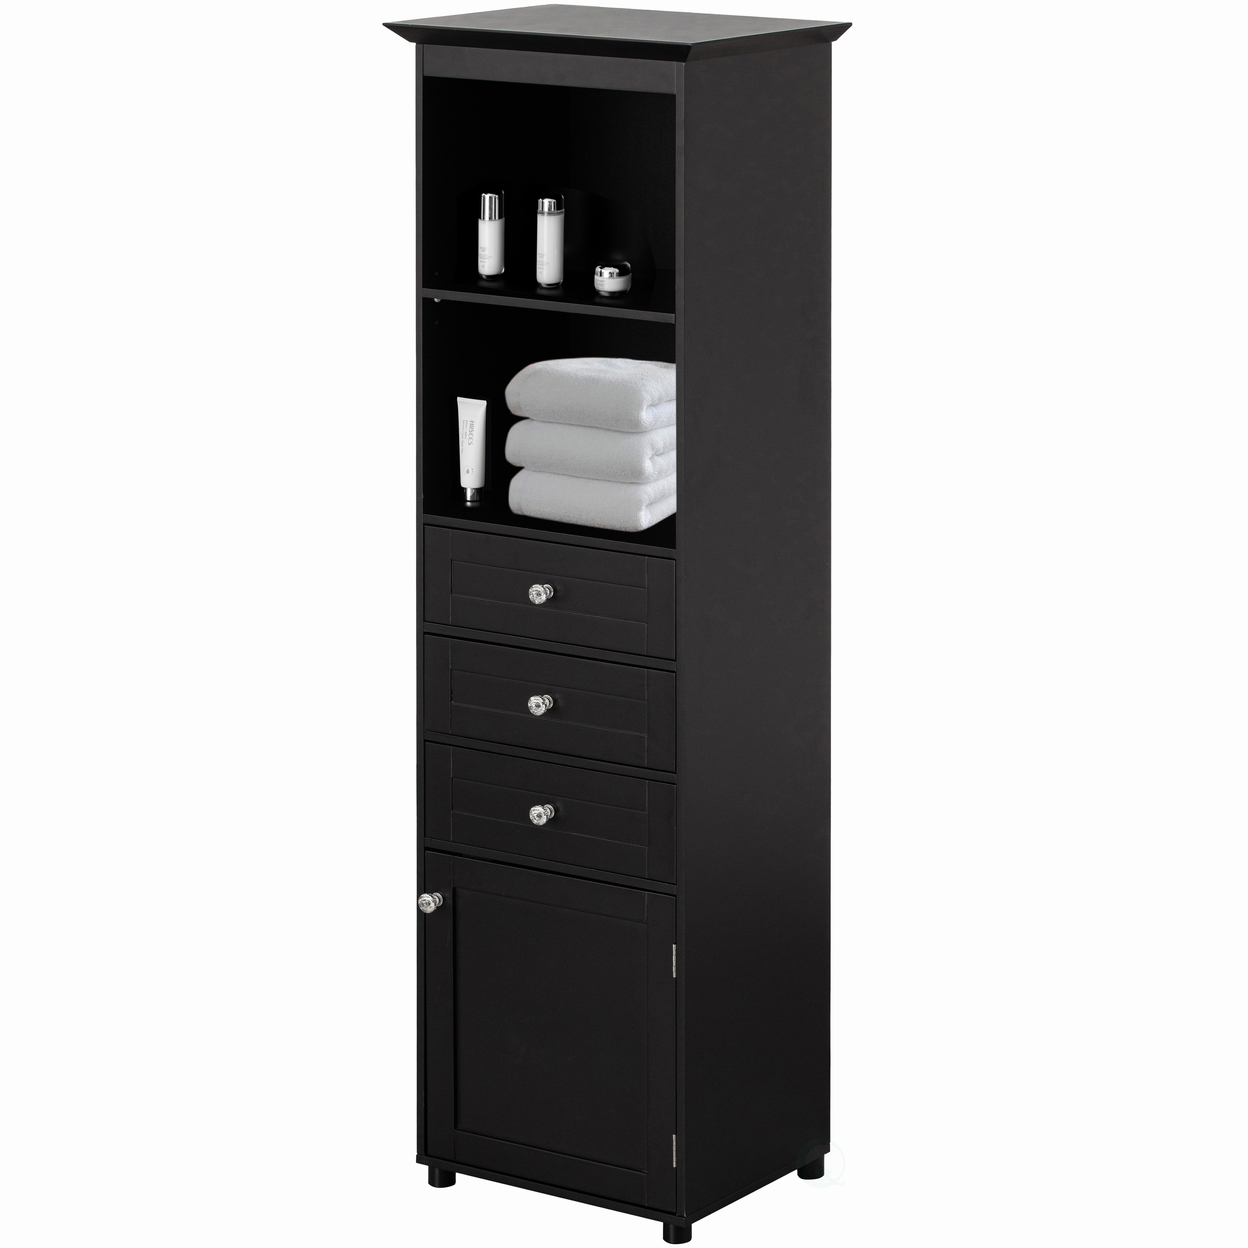 Tall Freestanding Storage Organizer Linen Tower, Vanity Closet, Bathroom Cabinet With 2 Open Shelves, 3 Drawers, And A Closet - Black